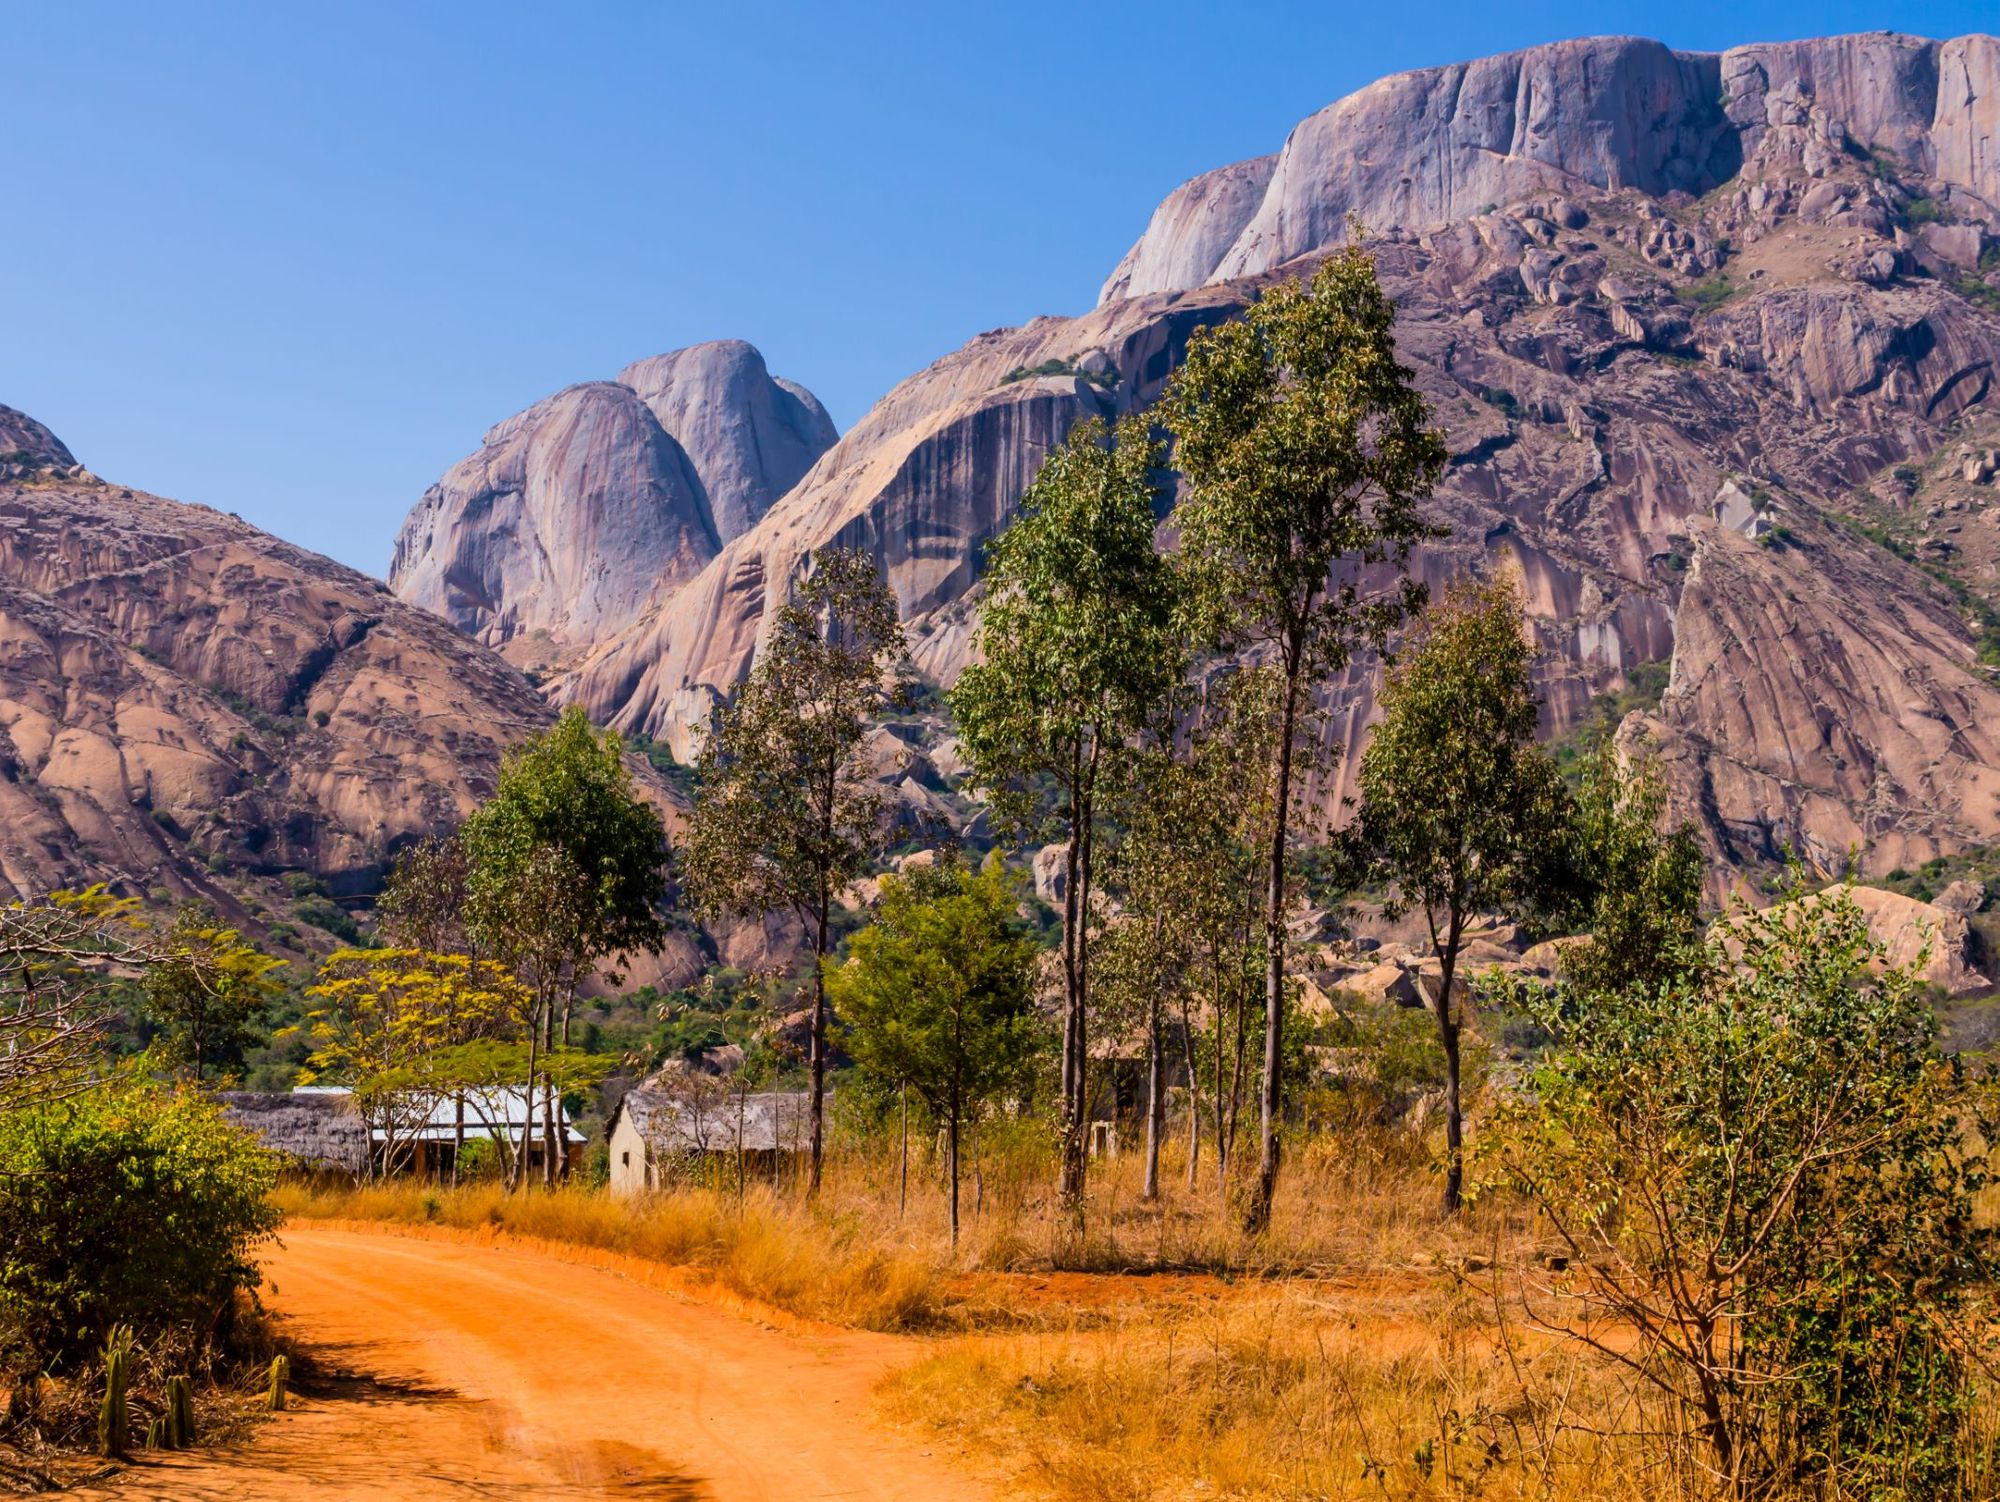 The Anja Granite Mountains Community Reserve rises behind the houses and trees.  Photo: Getty